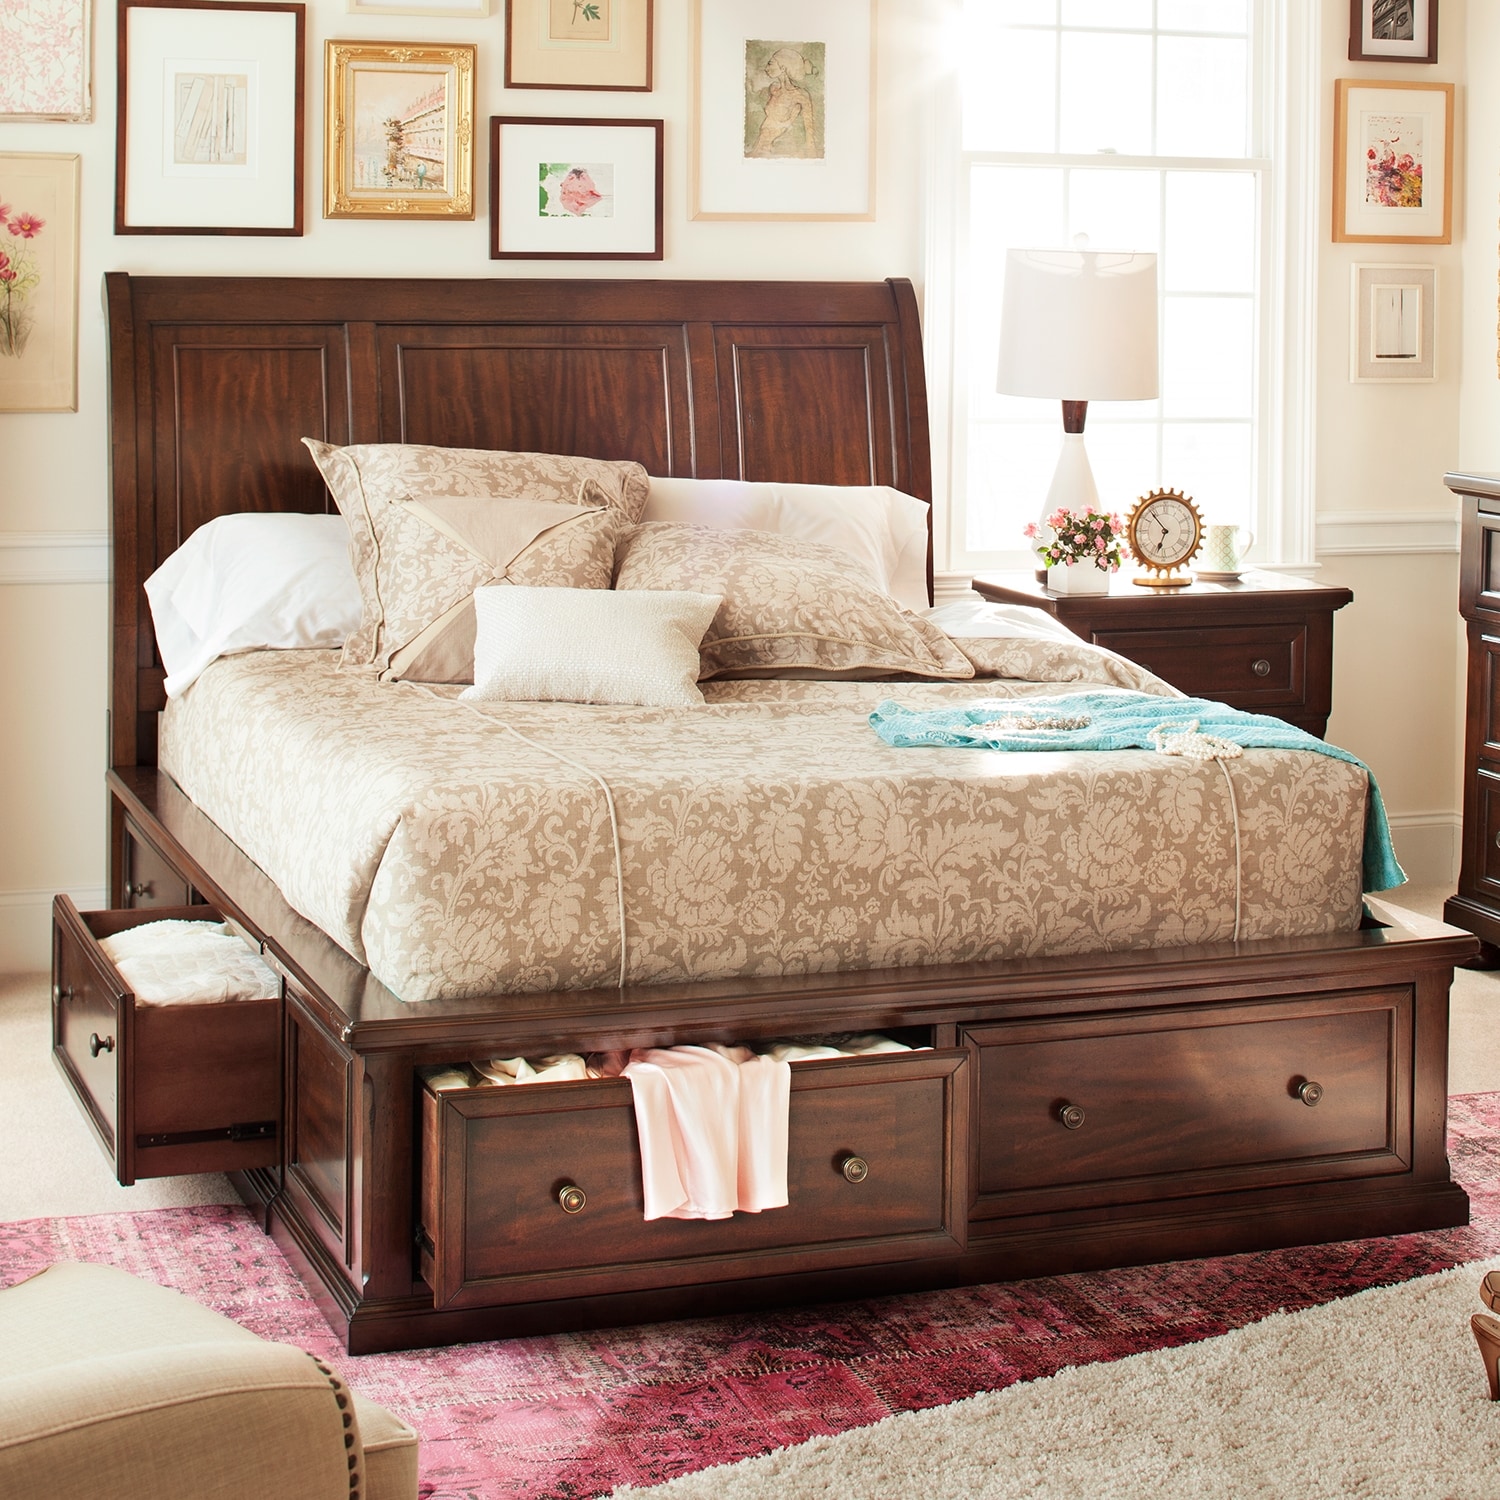 Hanover Queen Storage Bed | American Signature Furniture